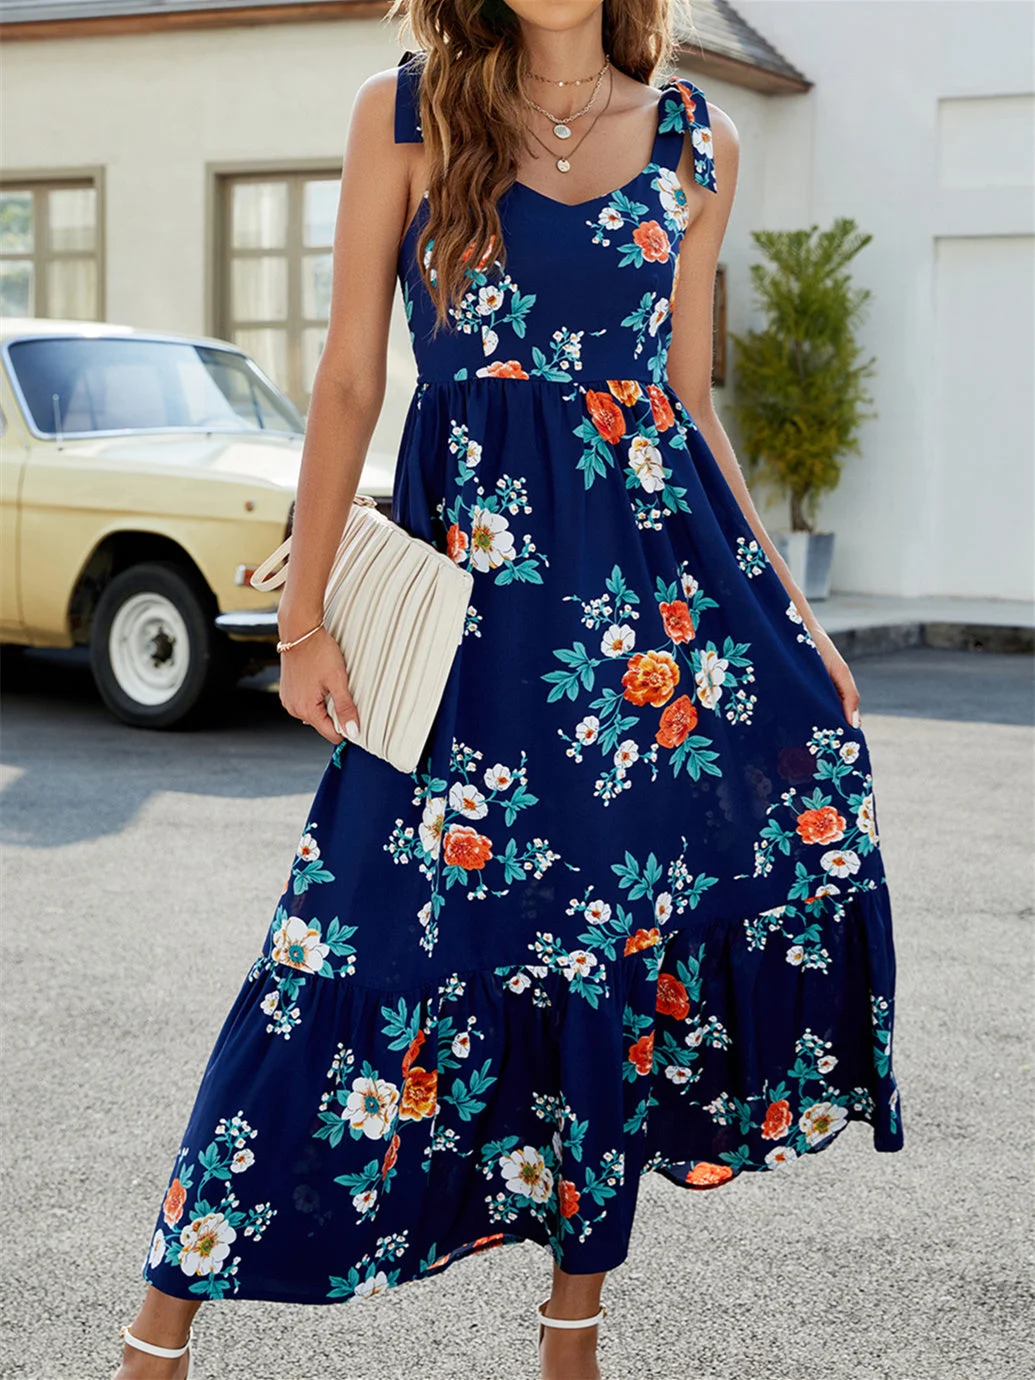 Women's Round Neck Sleeveless Floral Print Casual Dress